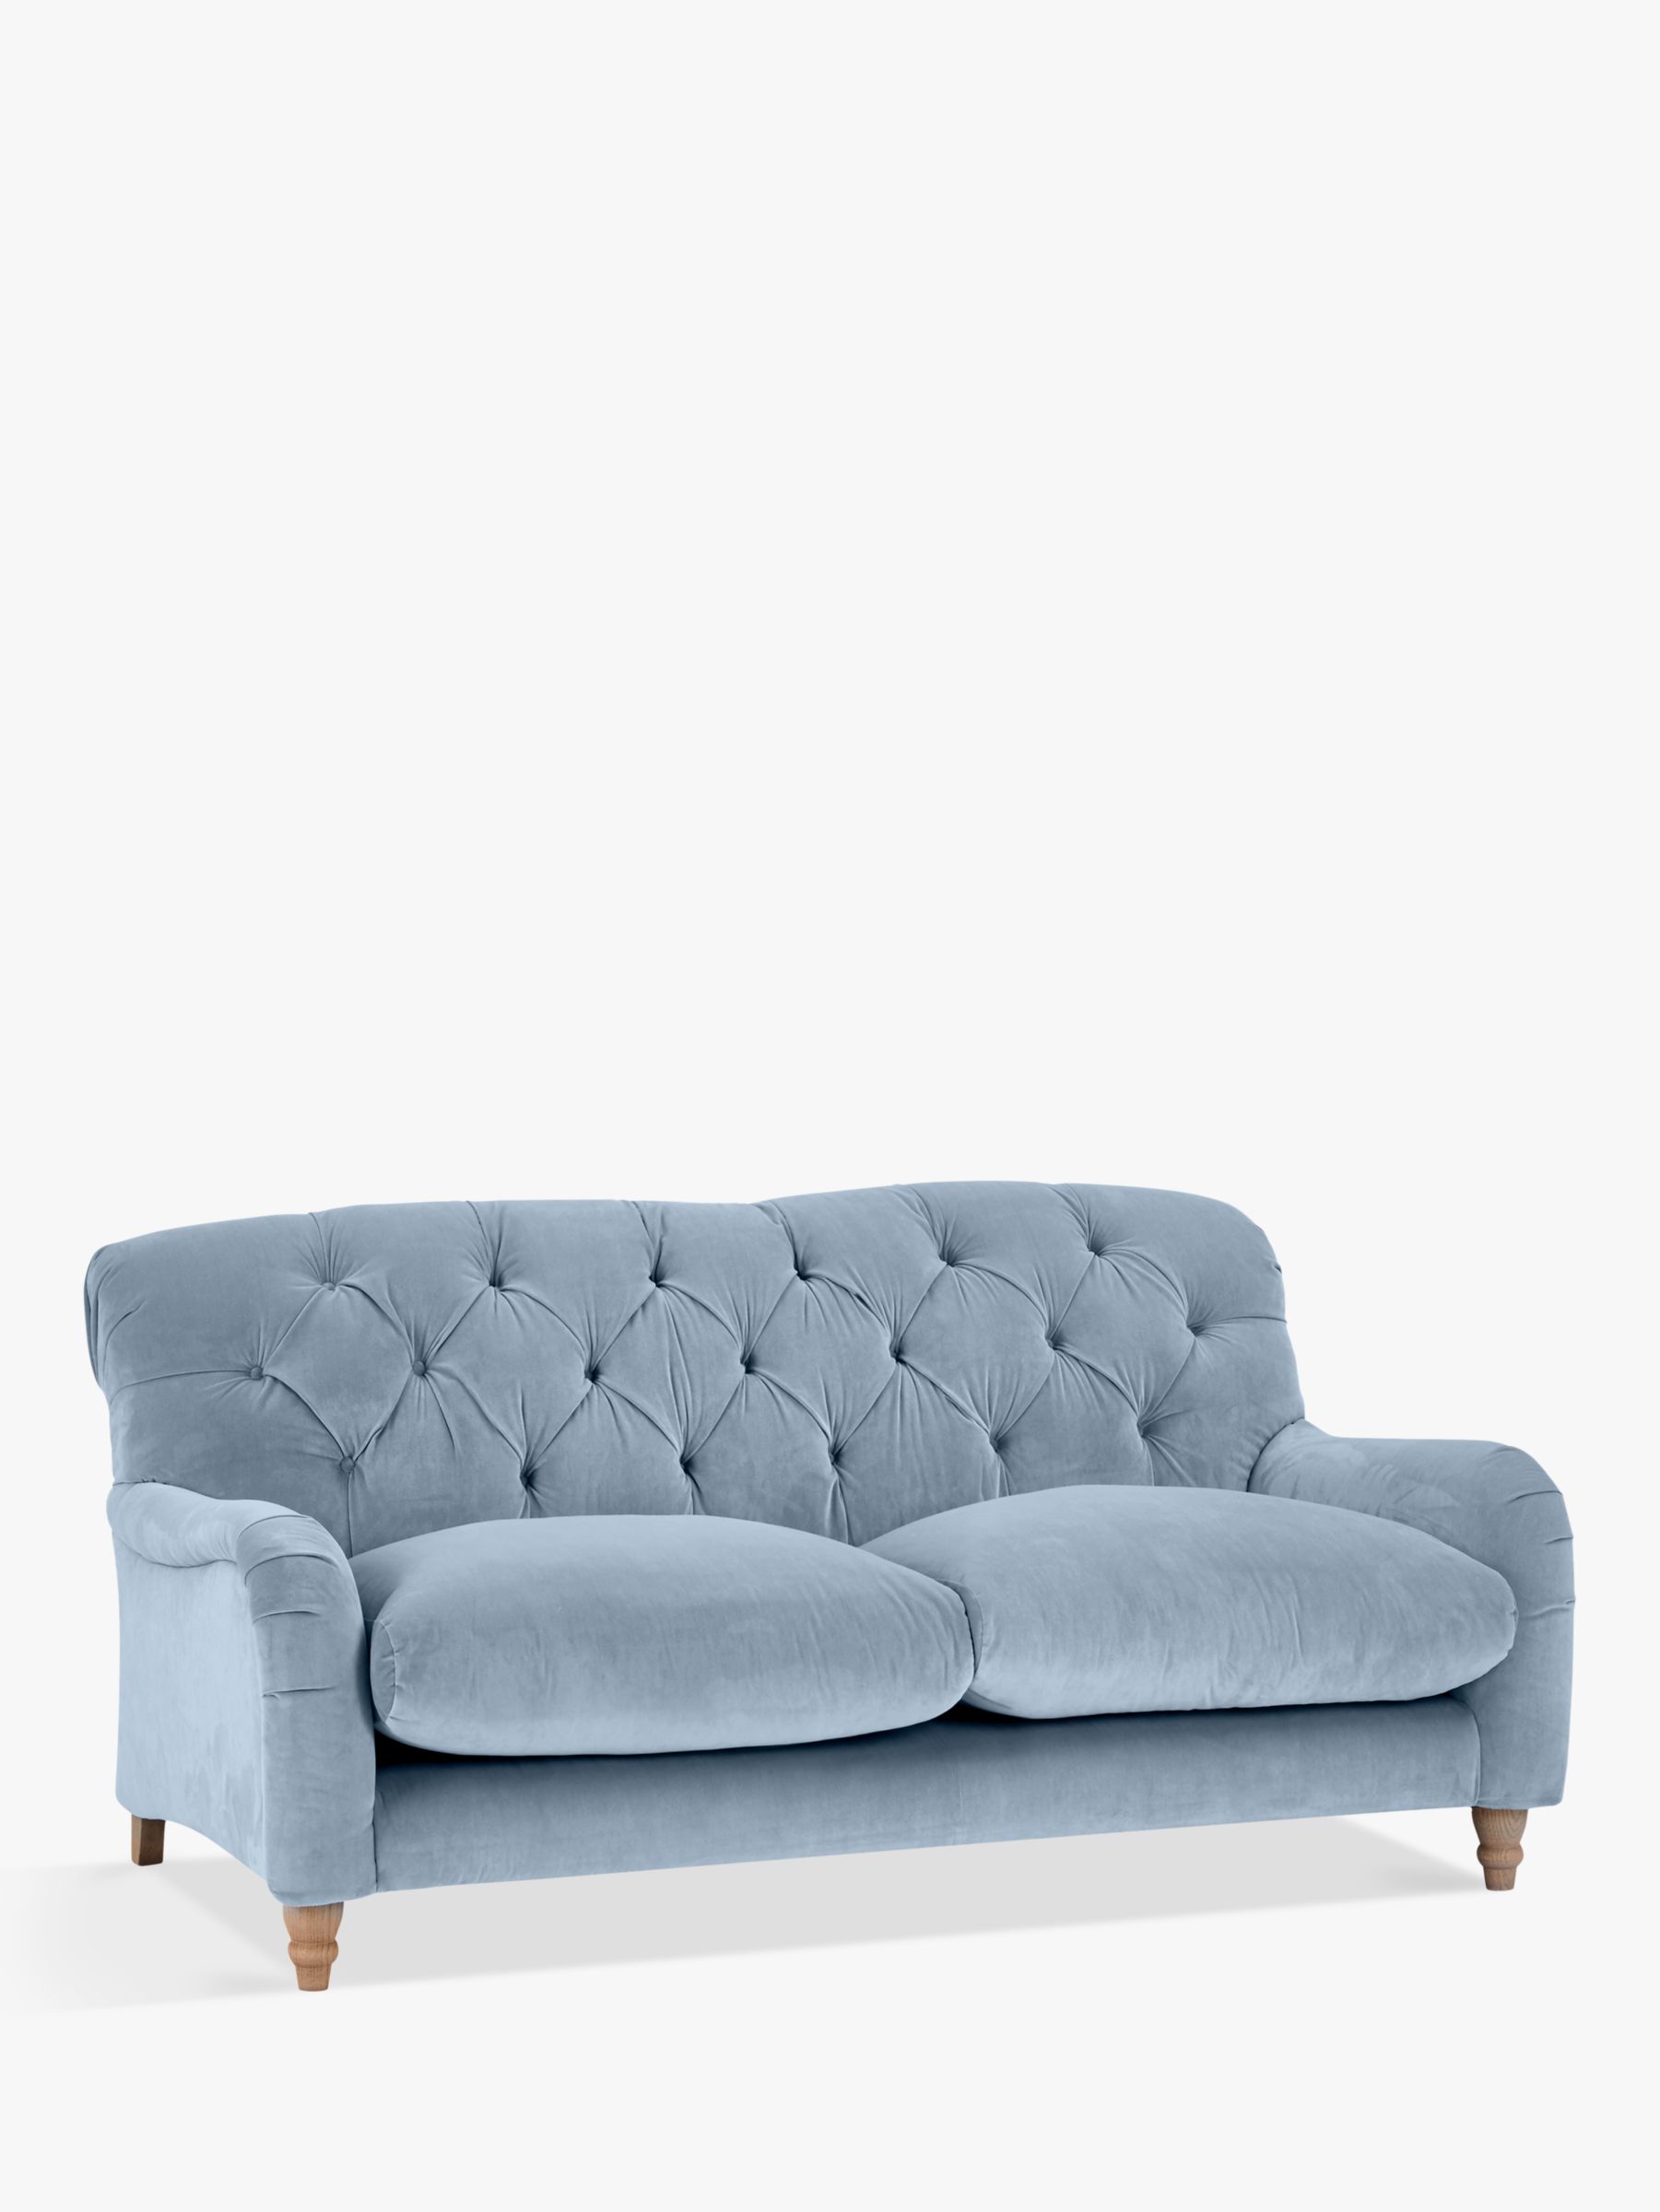 Crumble Medium 2 Seater Sofa by Loaf at John Lewis, Clever Velvet Winter Sky